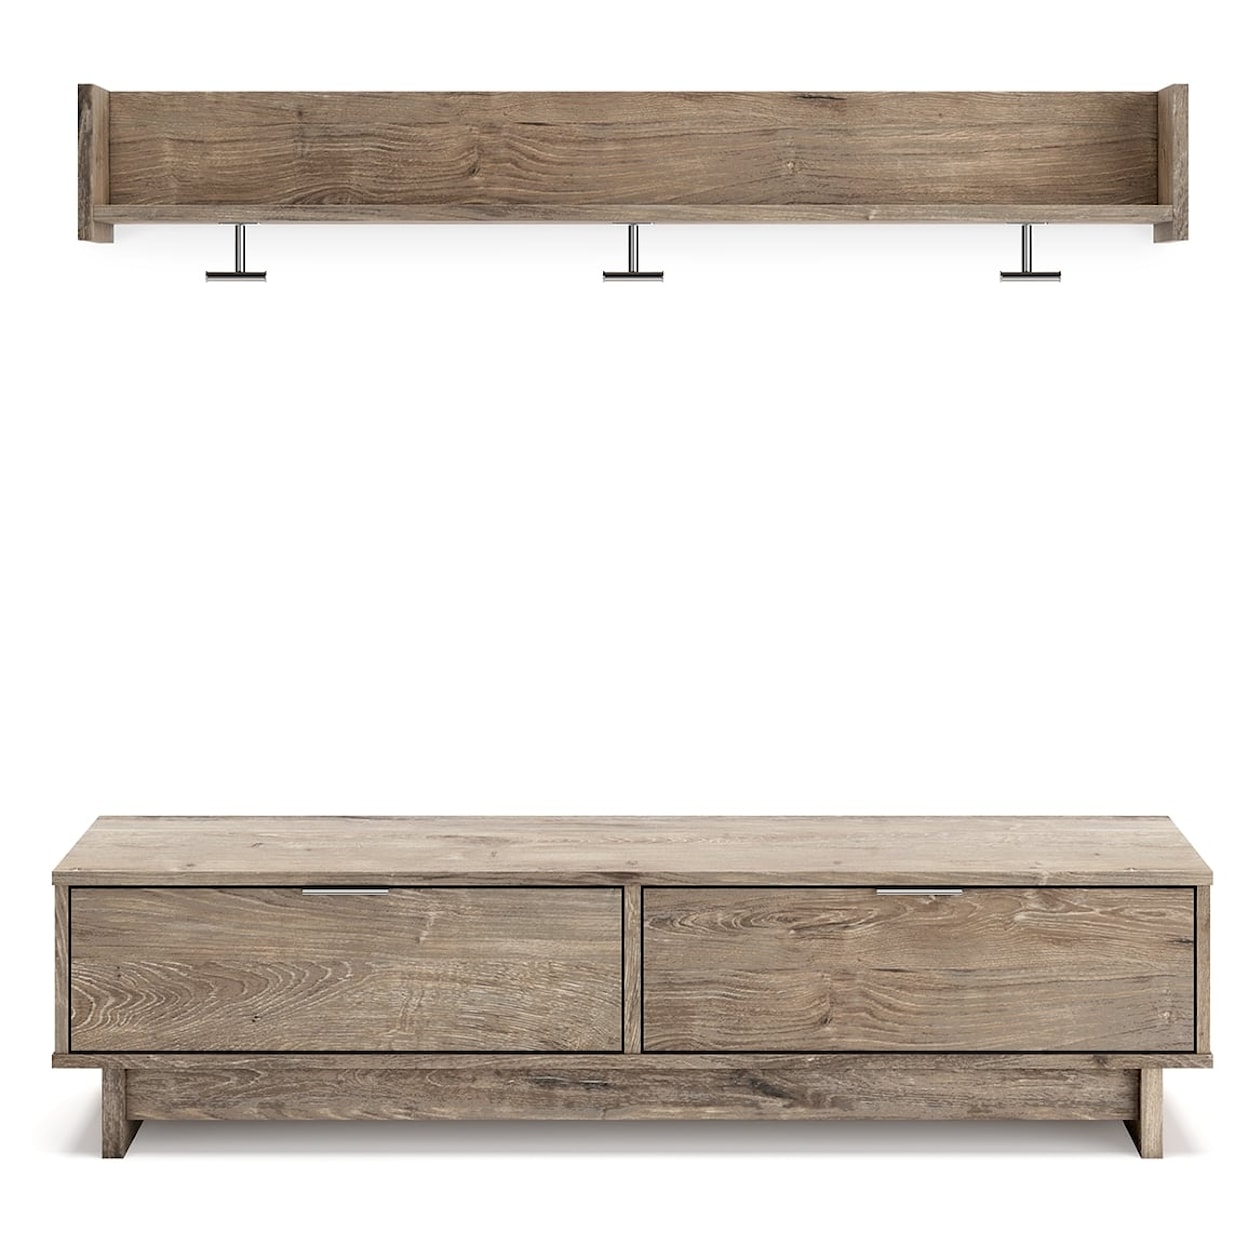 Signature Design by Ashley Furniture Oliah Bench with Coat Rack